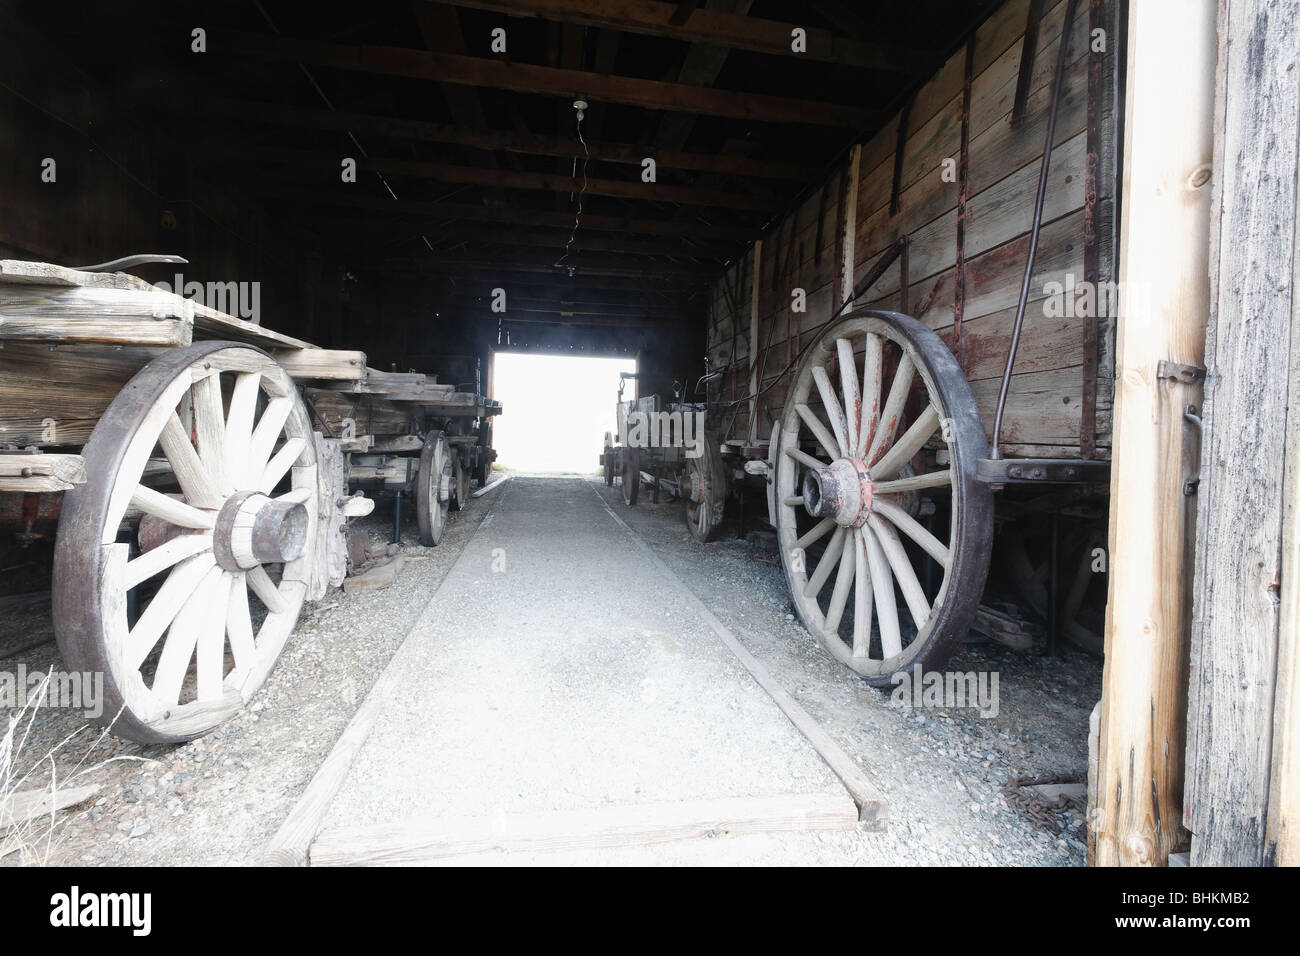 High-Sided Freight Wagons in a Barn, Bodie State Historic Park, California Stock Photo